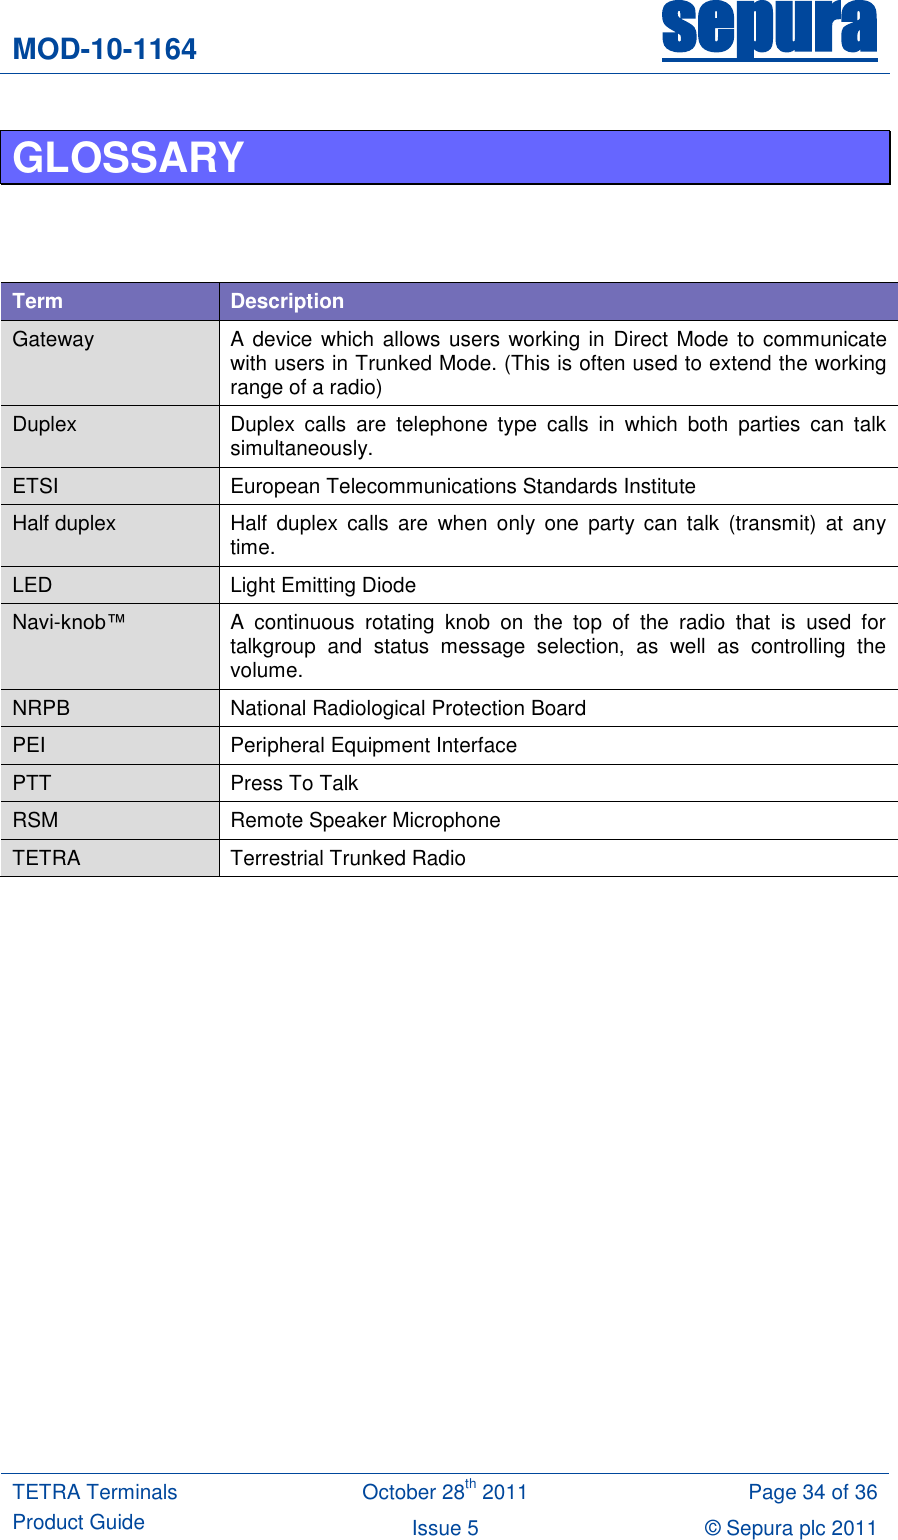 MOD-10-1164 sepura  TETRA Terminals Product Guide October 28th 2011 Page 34 of 36 Issue 5 © Sepura plc 2011   GLOSSARY     Term Description Gateway A device which allows users working in  Direct Mode  to communicate with users in Trunked Mode. (This is often used to extend the working range of a radio) Duplex Duplex  calls  are  telephone  type  calls  in  which  both  parties  can  talk simultaneously.  ETSI European Telecommunications Standards Institute Half duplex Half  duplex  calls  are  when  only  one  party  can  talk  (transmit)  at  any time. LED Light Emitting Diode Navi-knob™  A  continuous  rotating  knob  on  the  top  of  the  radio  that  is  used  for talkgroup  and  status  message  selection,  as  well  as  controlling  the volume. NRPB National Radiological Protection Board PEI Peripheral Equipment Interface PTT Press To Talk RSM Remote Speaker Microphone TETRA Terrestrial Trunked Radio     